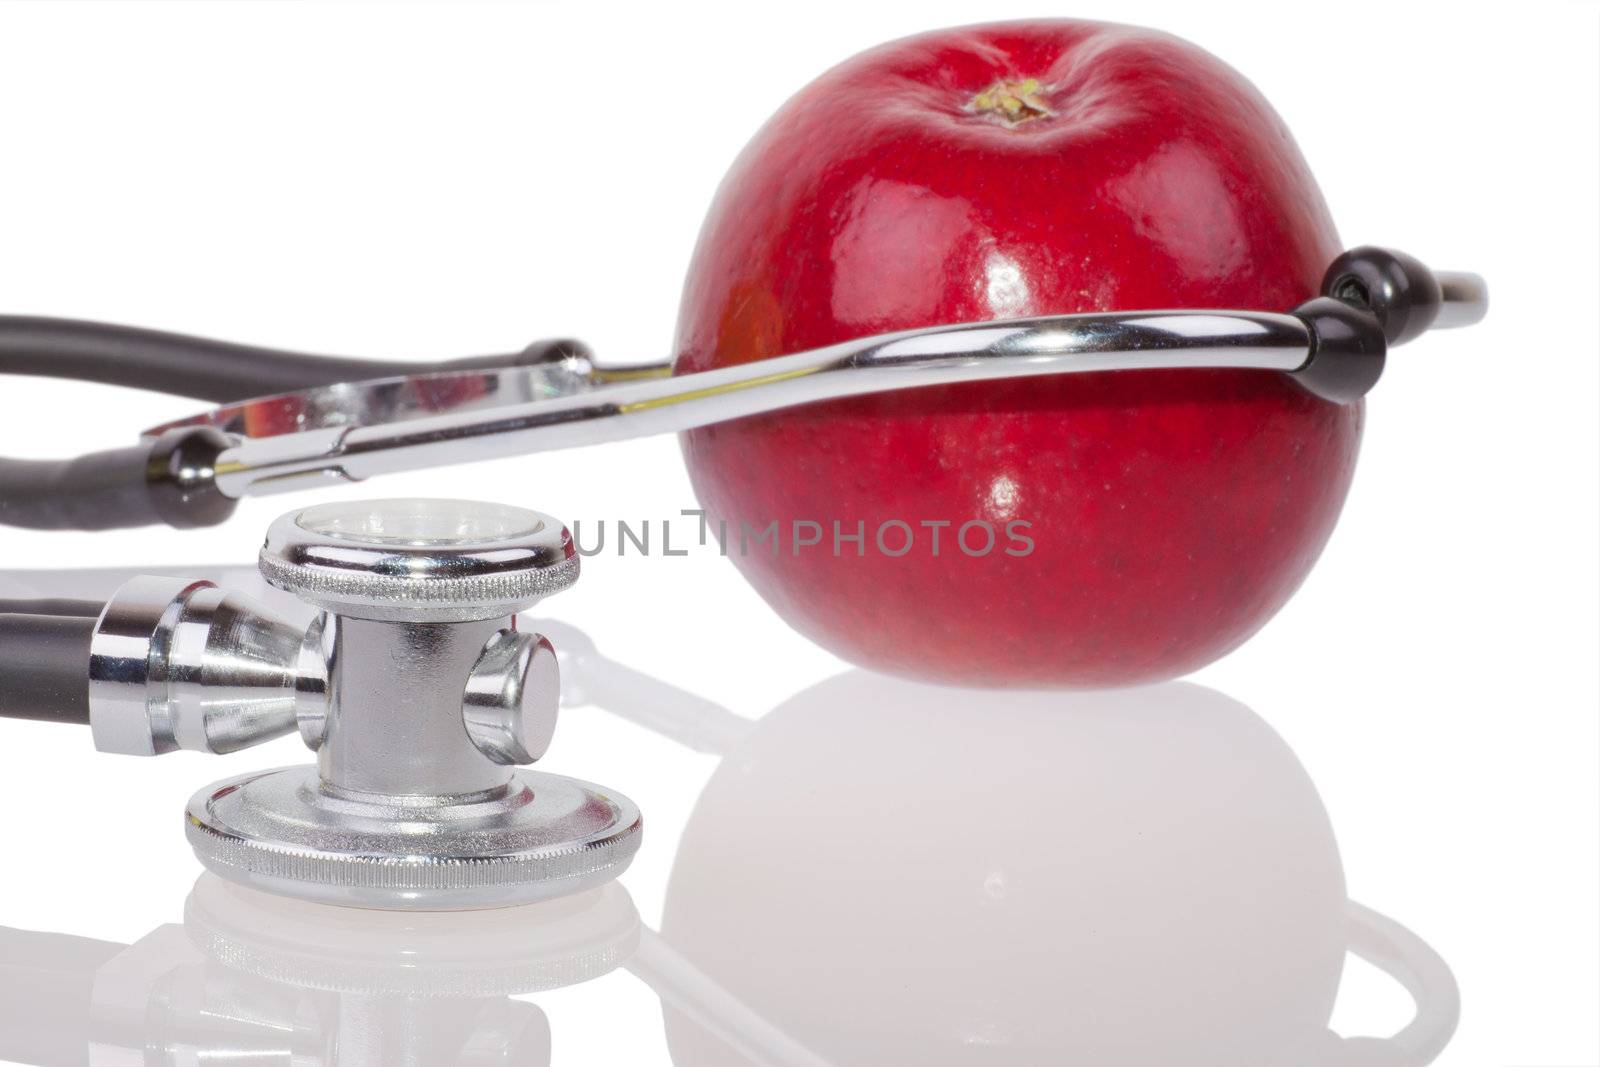 Stethoscope and apple by georgenightingale